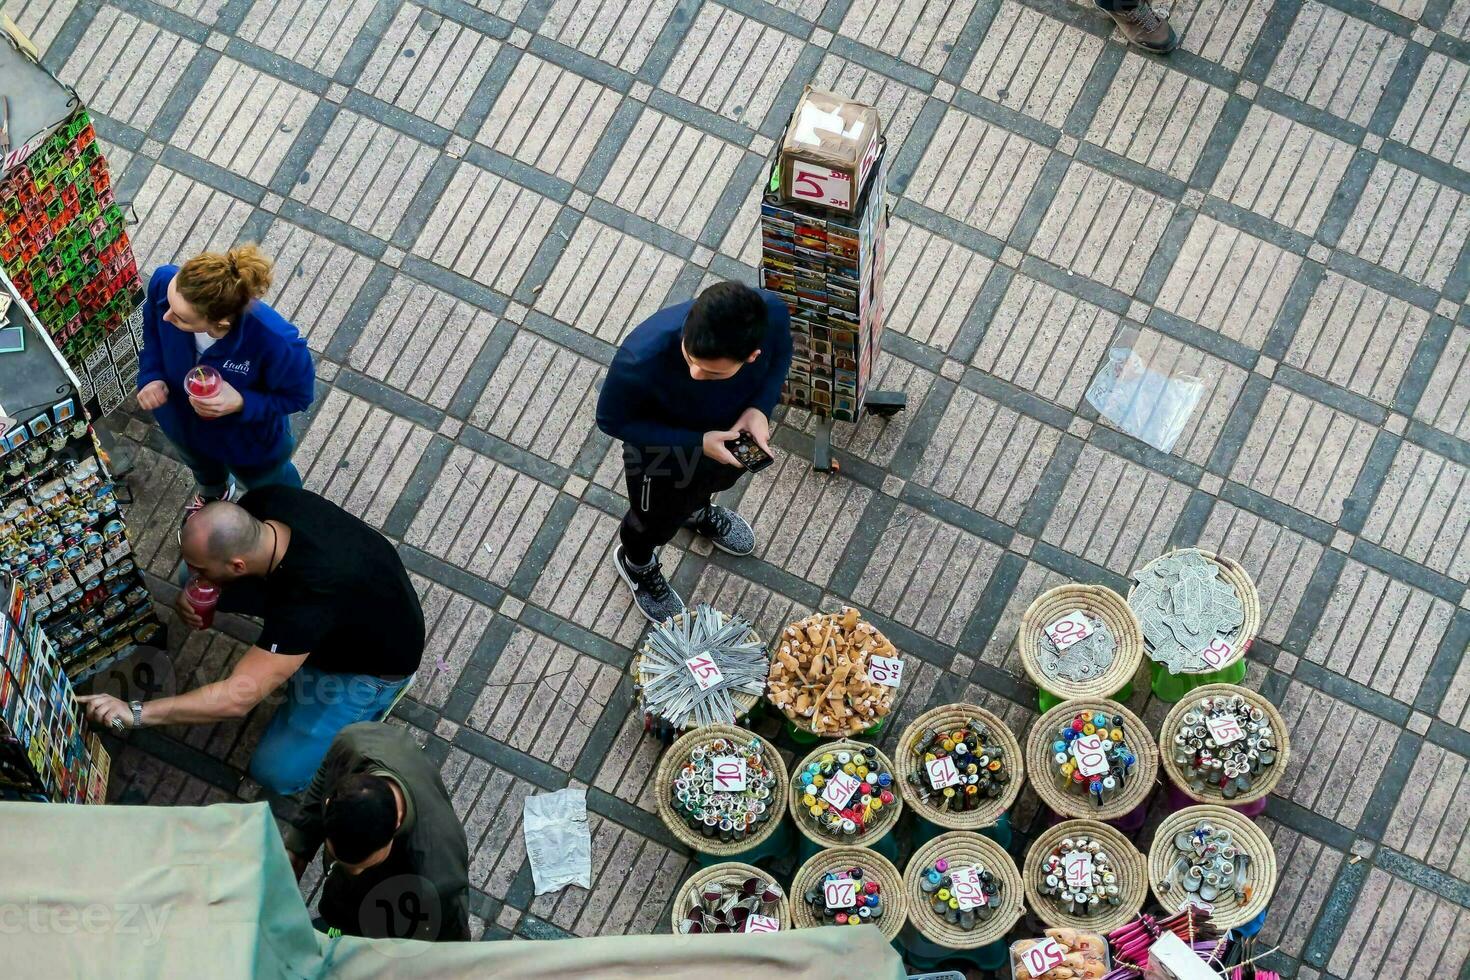 people are shopping at a market with baskets photo